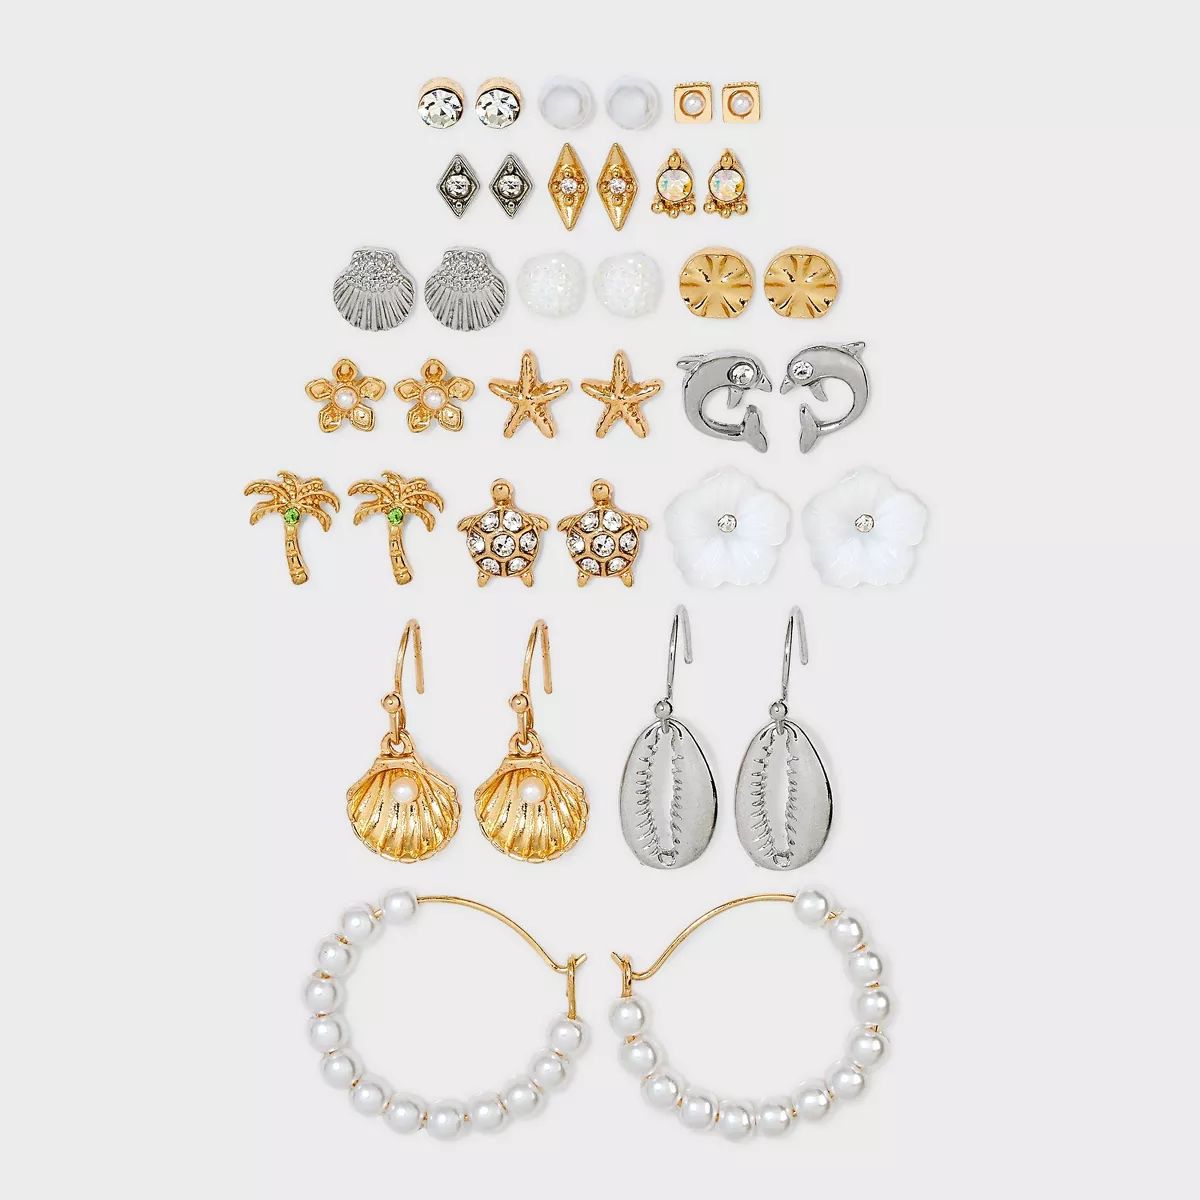 Sea Life Earrings with Genuine Shell Set 18pc - Wild Fable™ Mixed Metal | Target